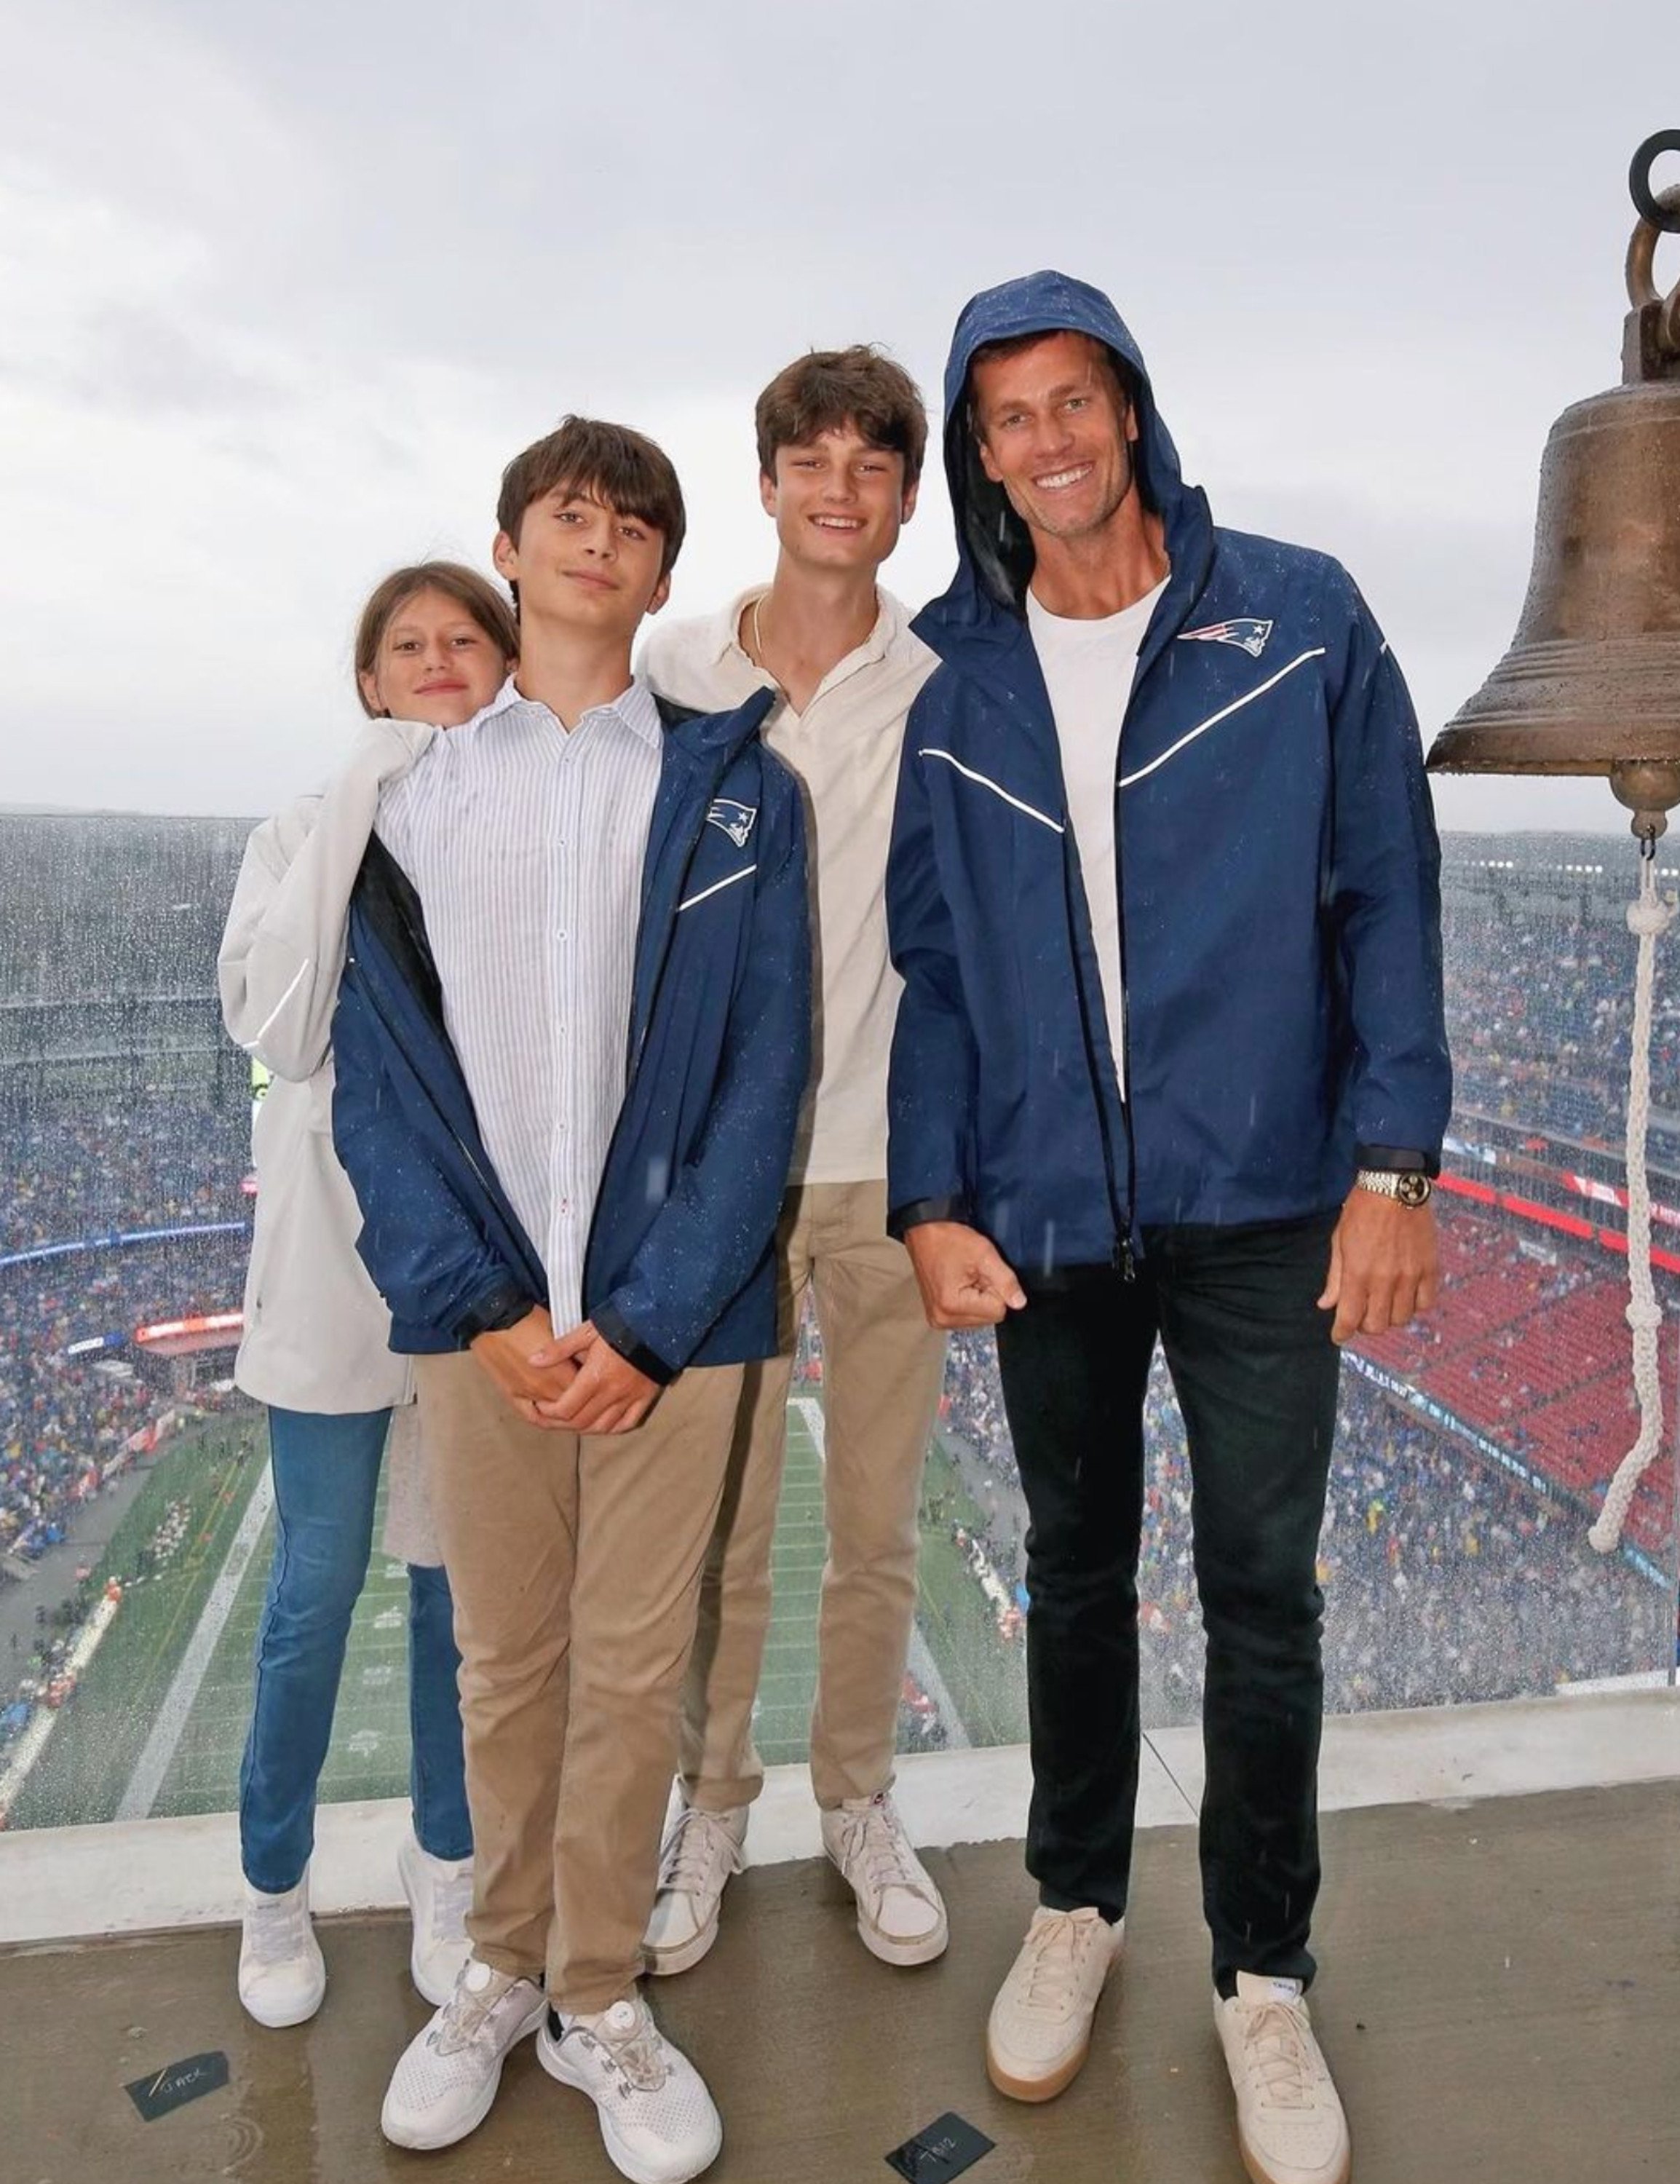 He's the Nicest Guy Ever”: Mother of Tom Brady's Son Bridget